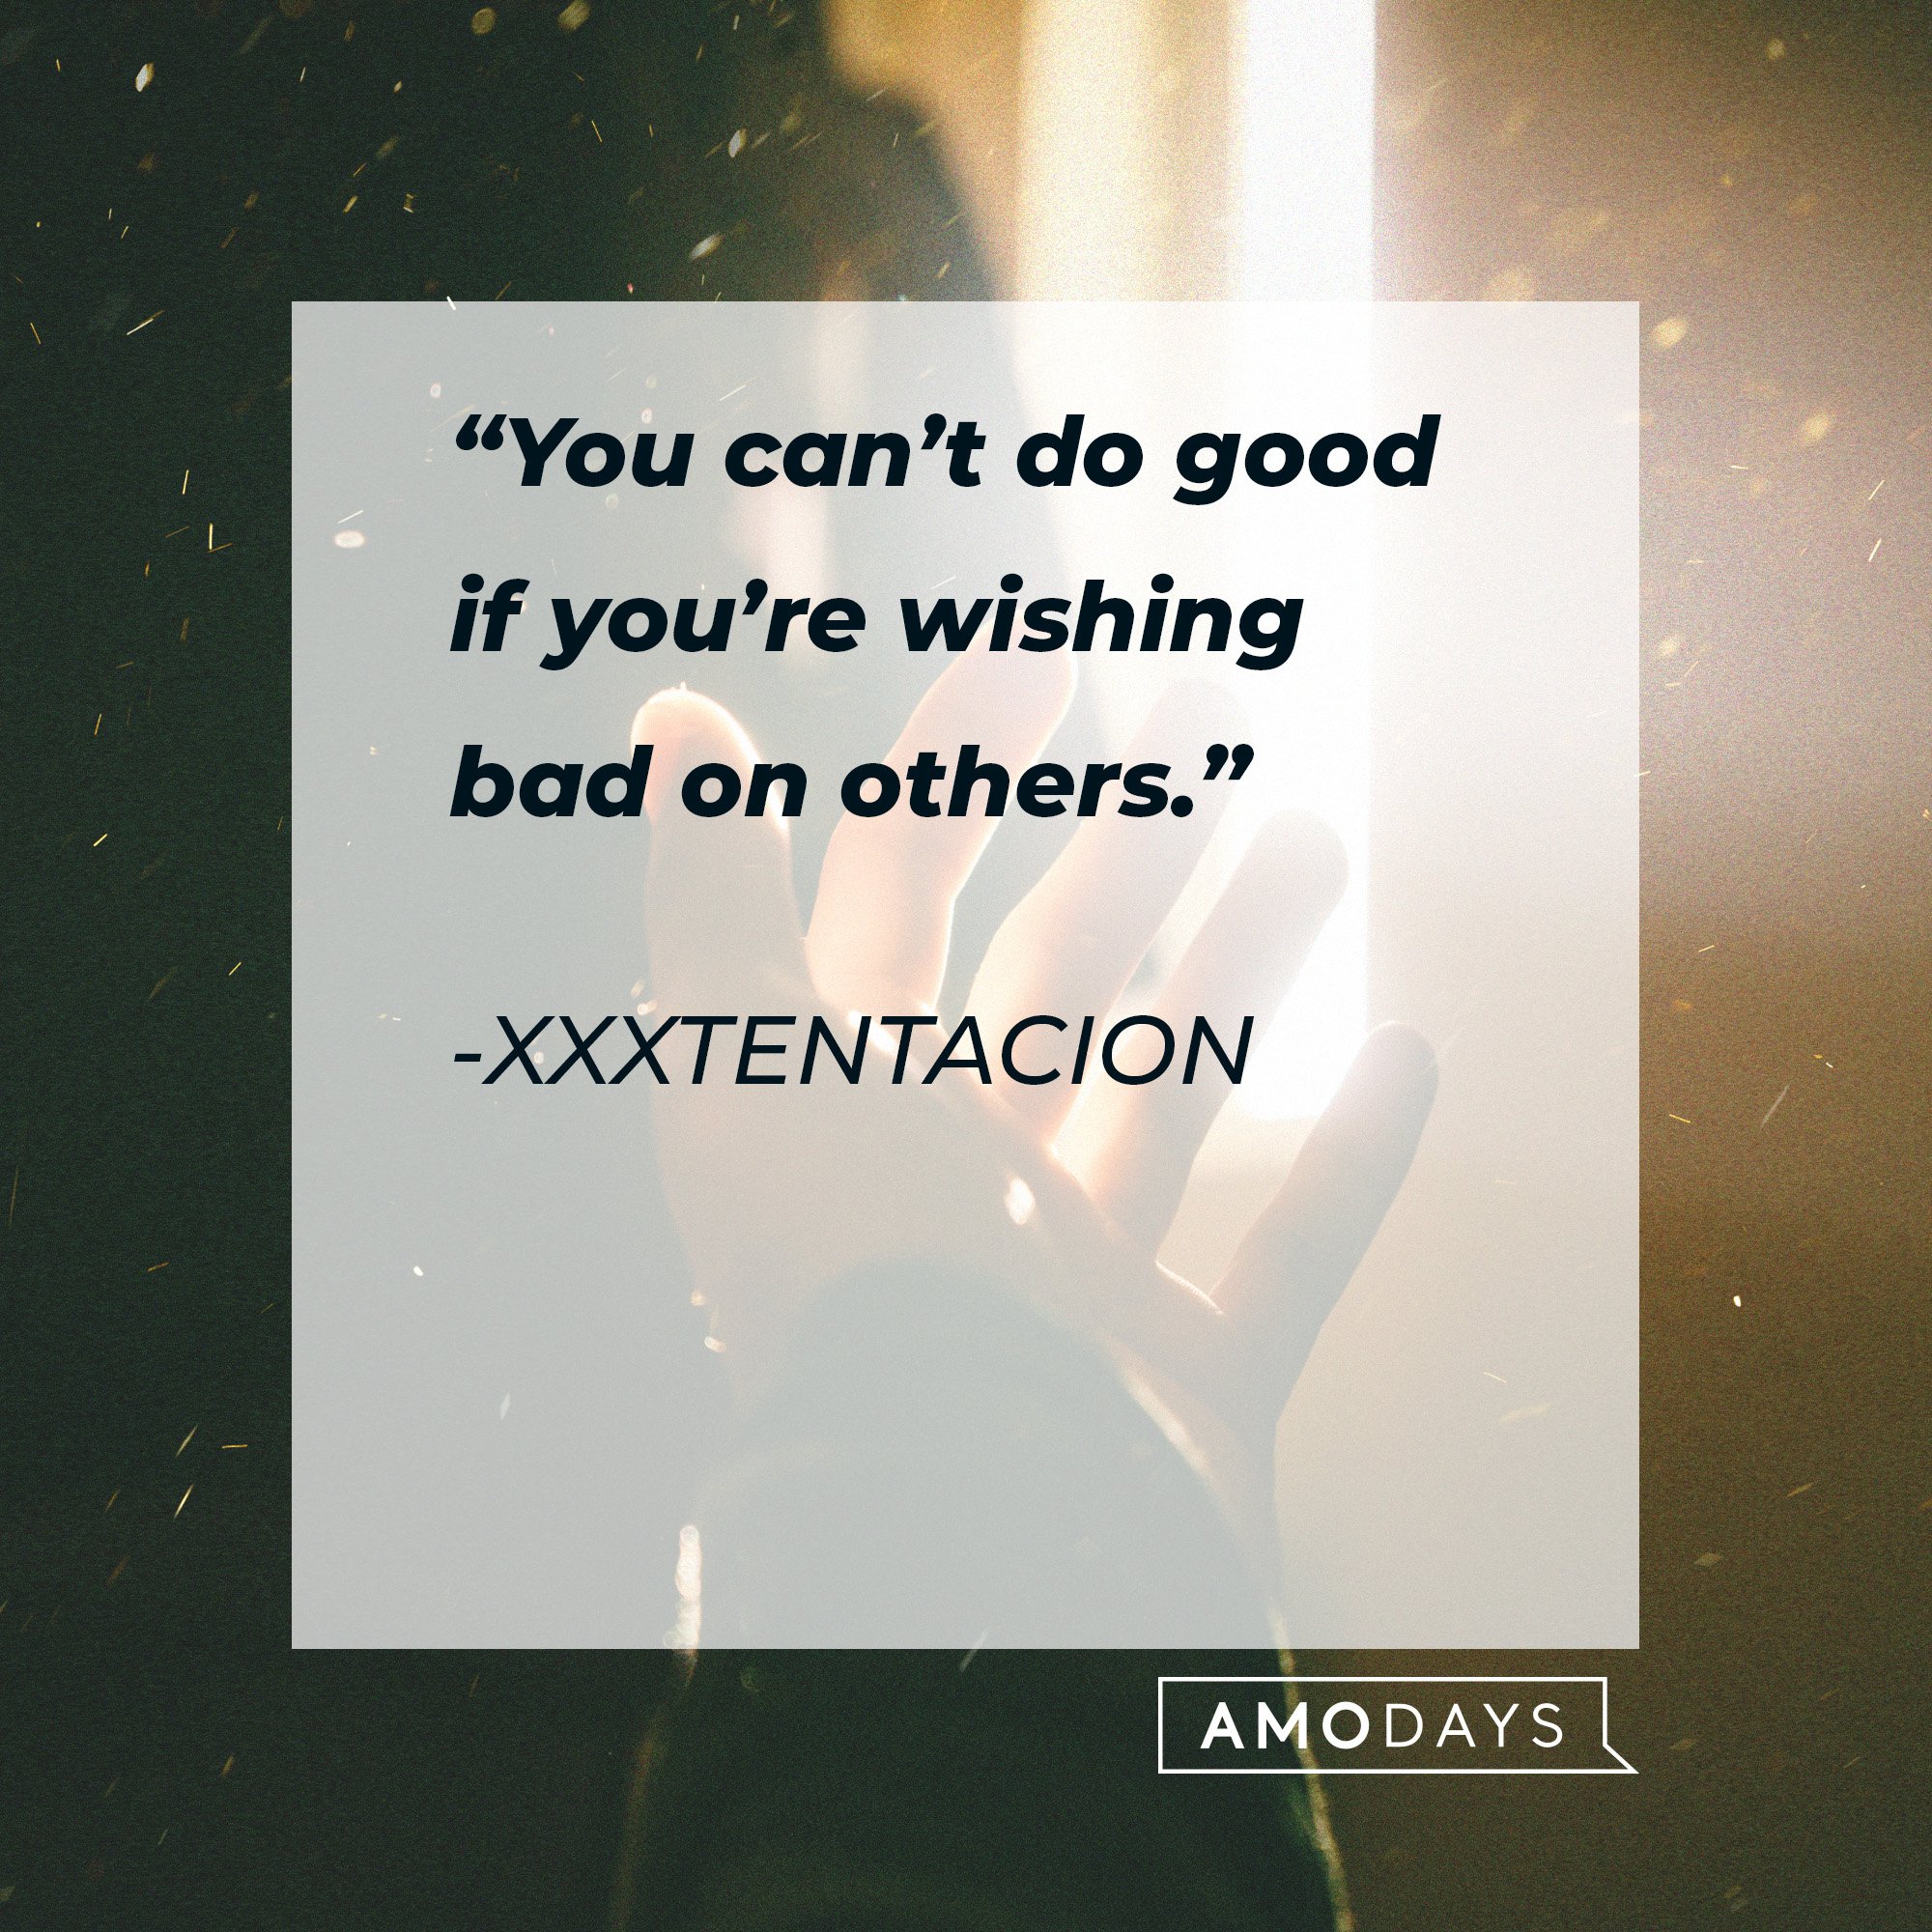 Xxxtentacion’s quote: “You can’t do good if you’re wishing bad on others.” | Image: AmoDays